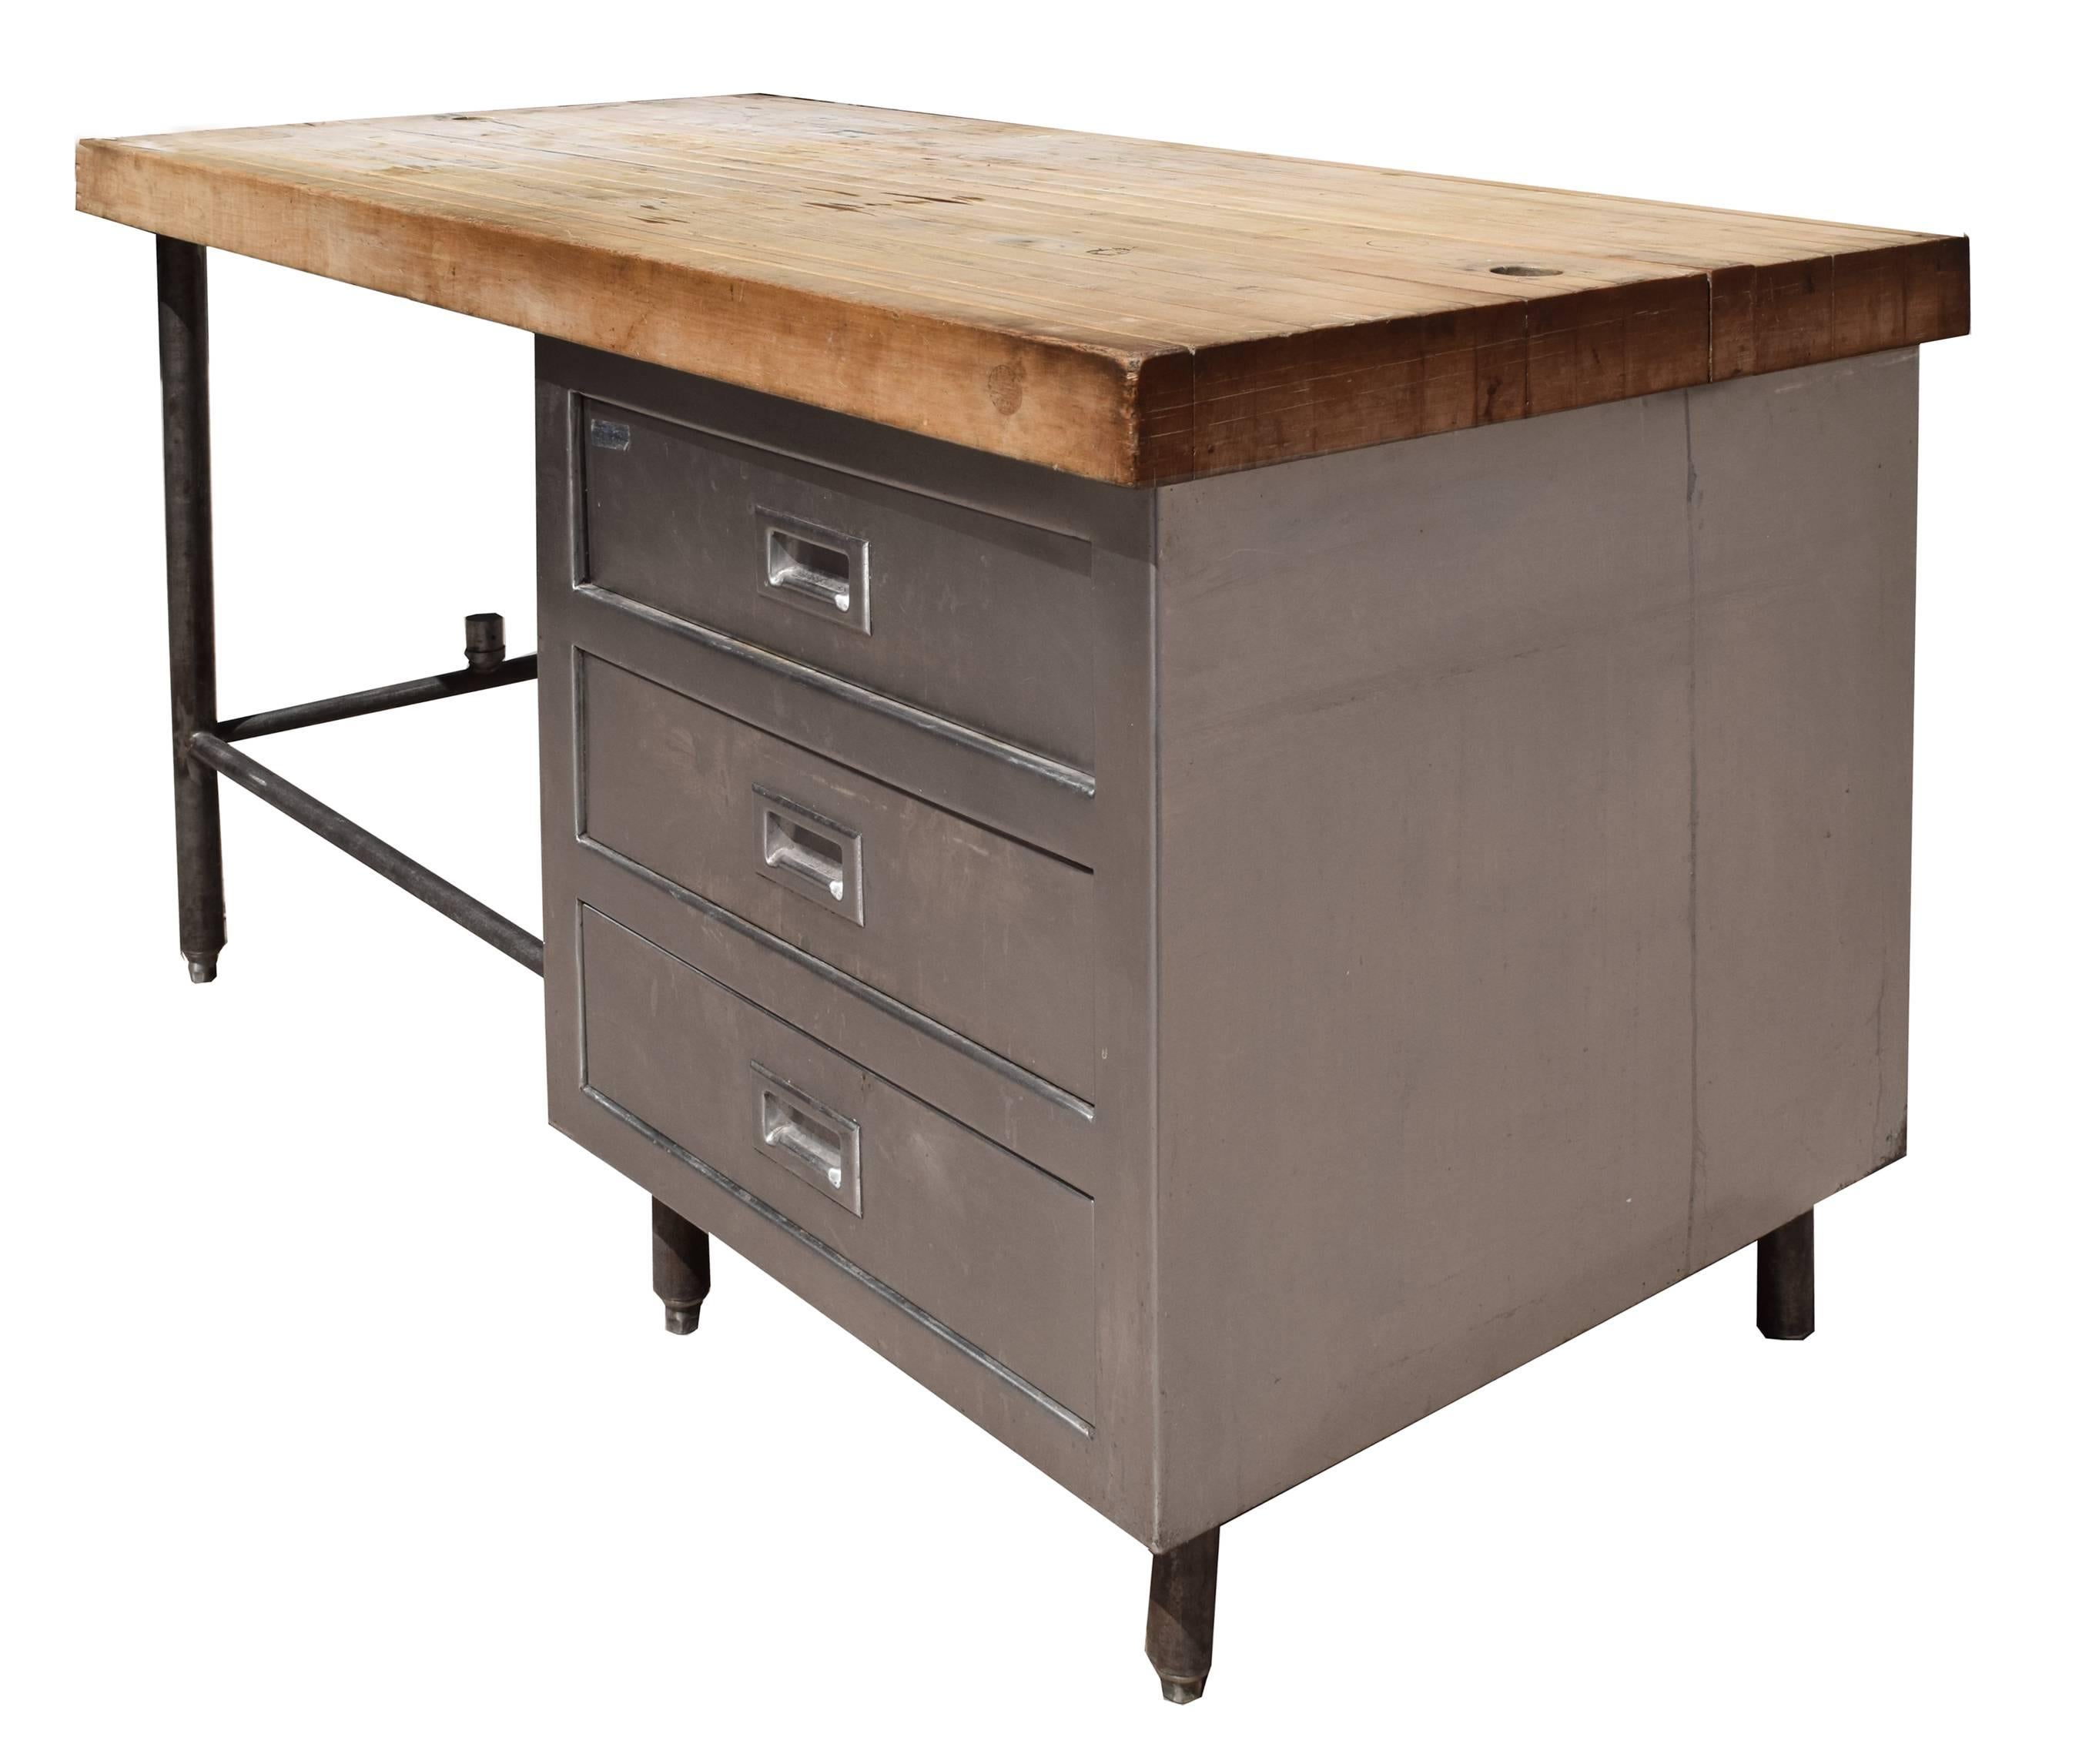 American Industrial Table with Butcher Block Top